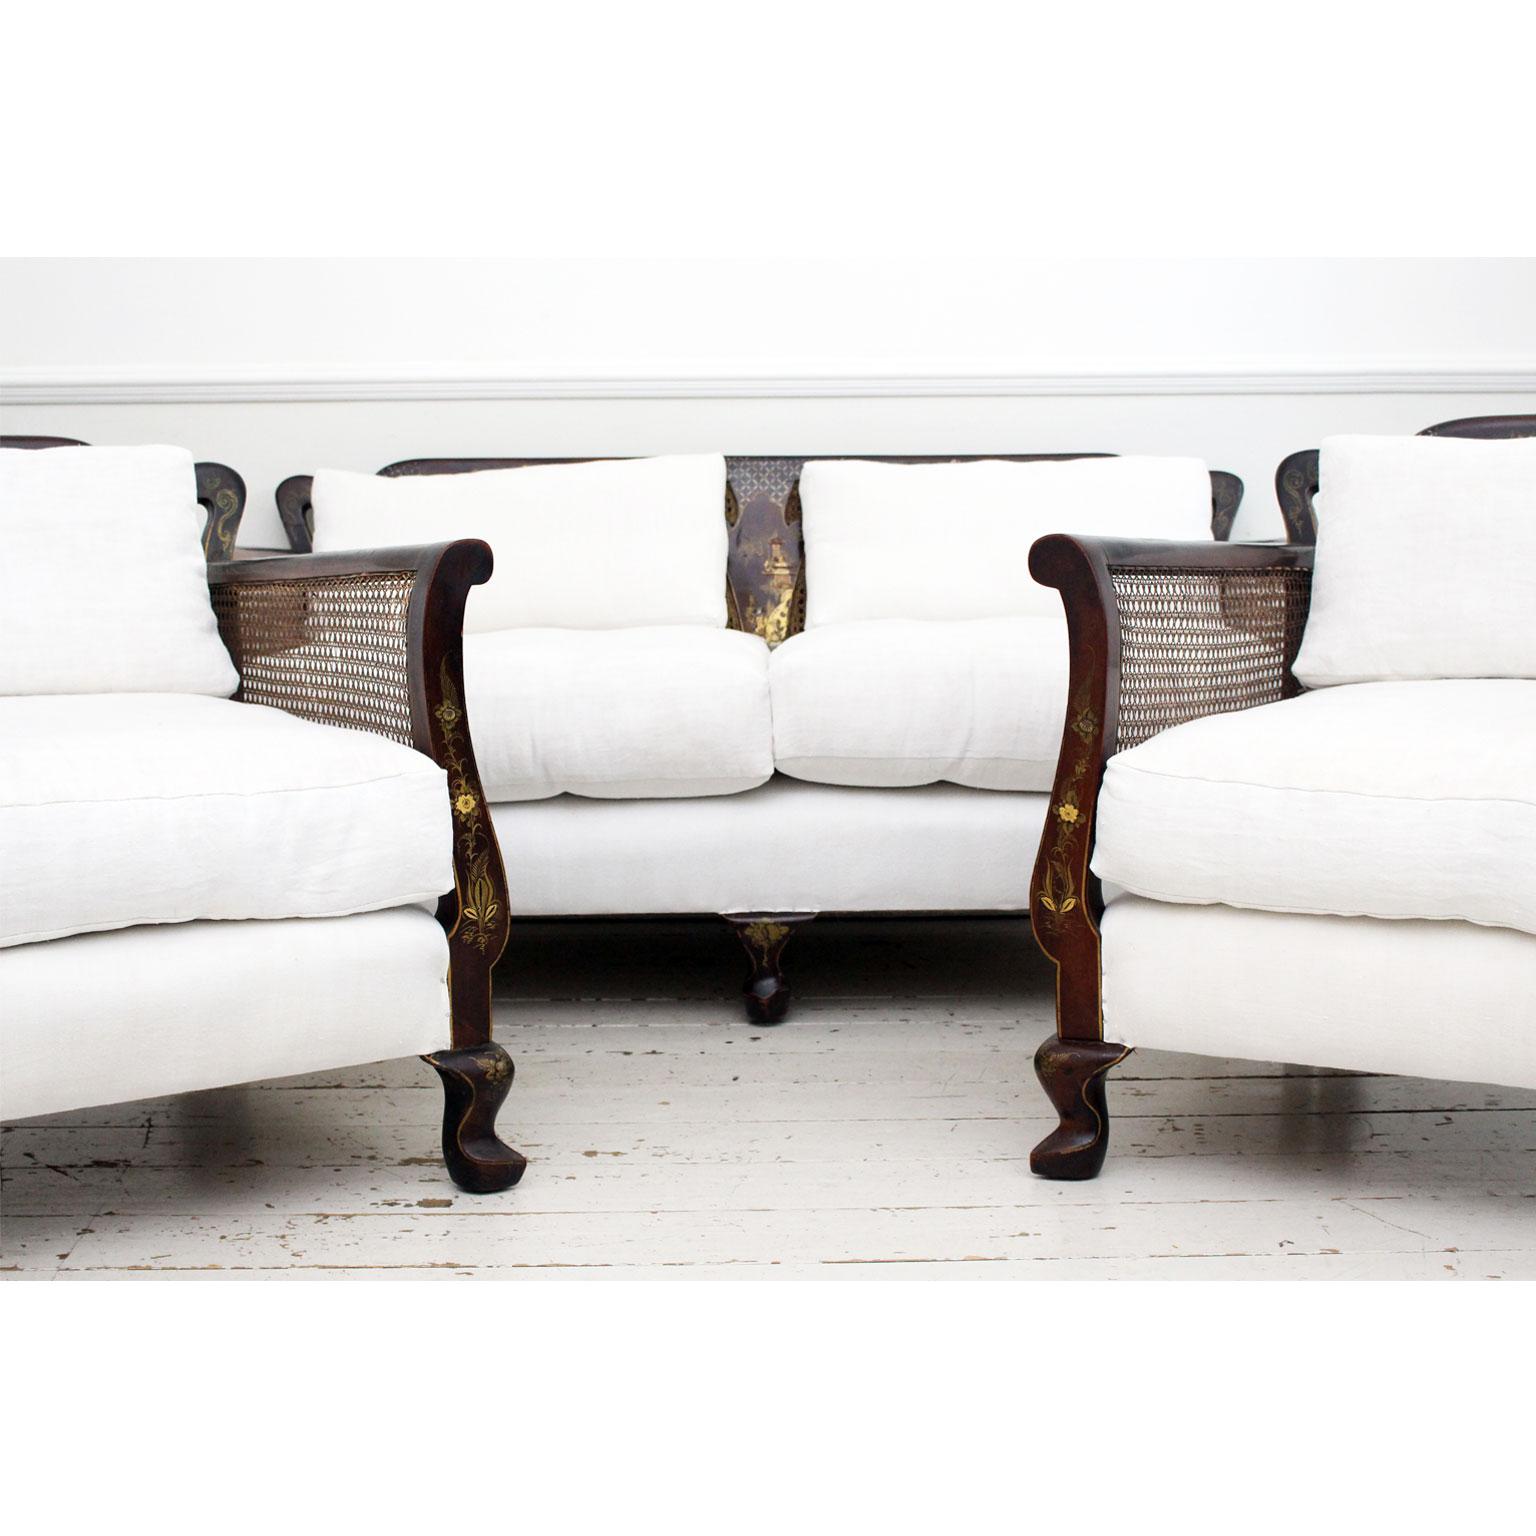 This very decorative early 1900s three piece bergere suite, comprising a sofa and pair of armchairs, is beautifully shaped with generous proportions and slipper feet. The walnut has a lovely warm patina. Each piece is embellished with Chinoiserie